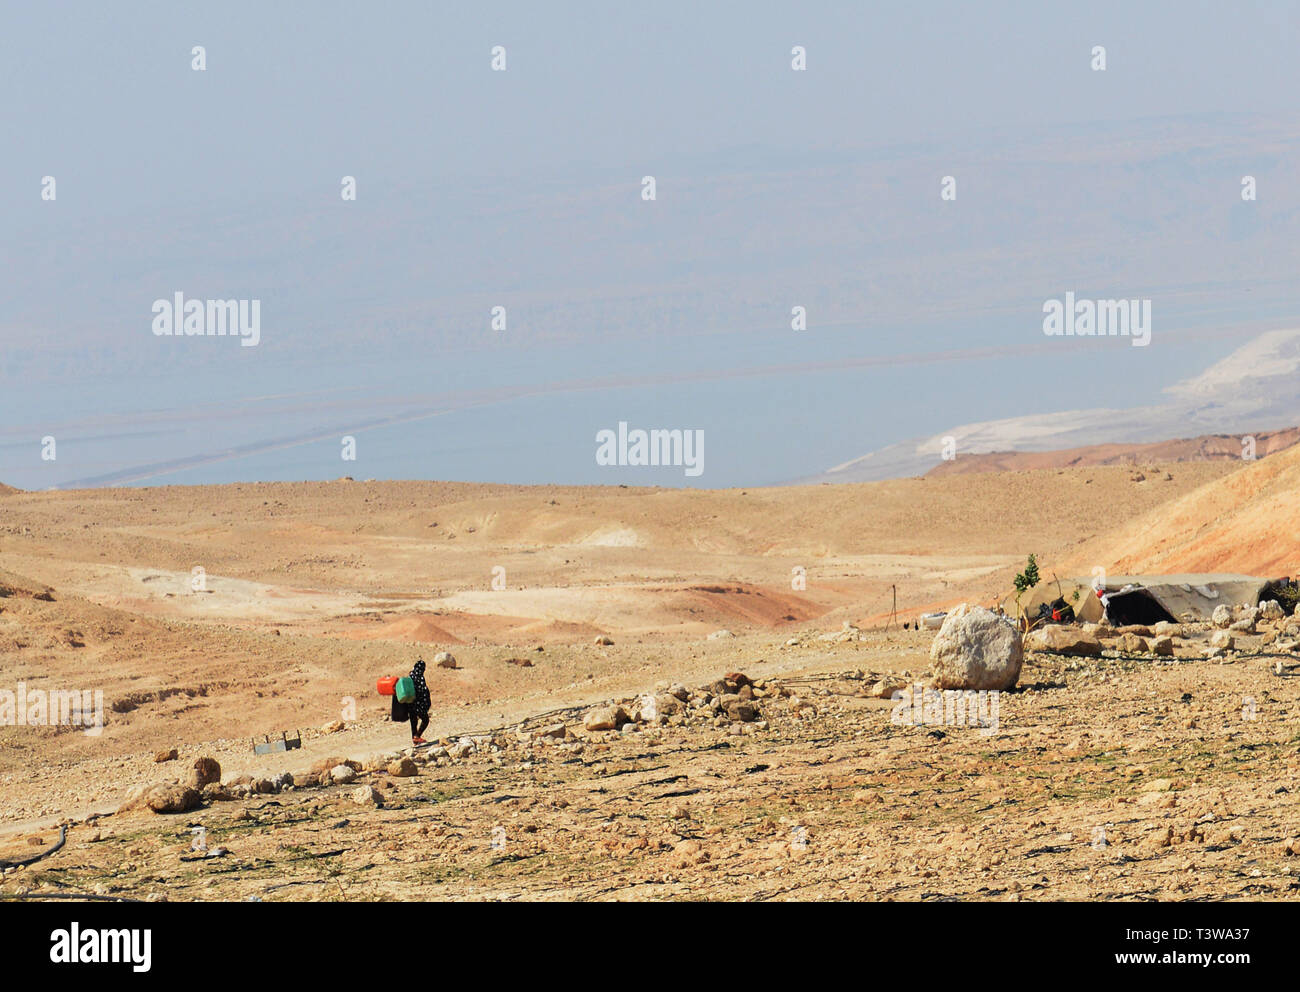 A Bedouin woman carrying water jerrycans back to her family's tent. Stock Photo